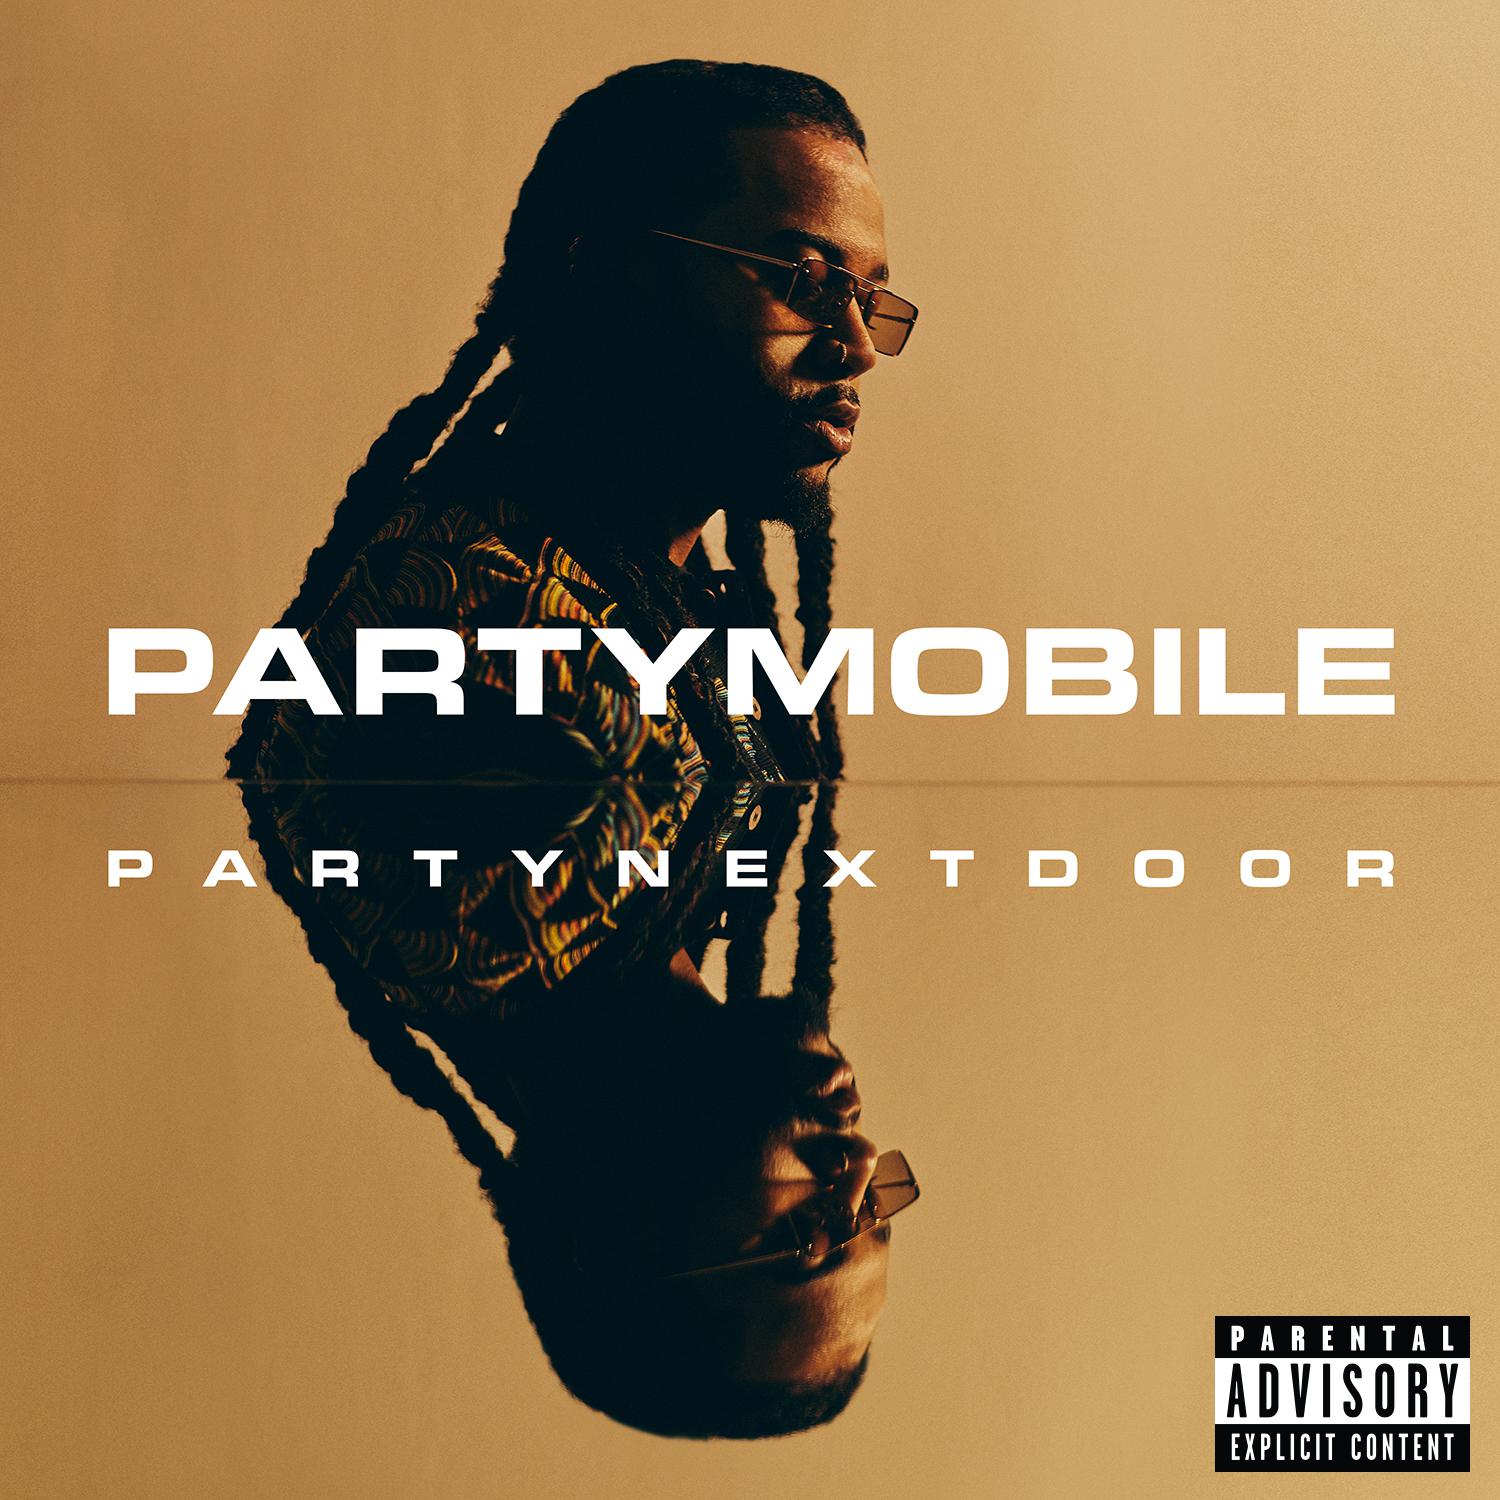 ANOTHER DAY歌词 歌手PARTYNEXTDOOR-专辑PARTYMOBILE-单曲《ANOTHER DAY》LRC歌词下载